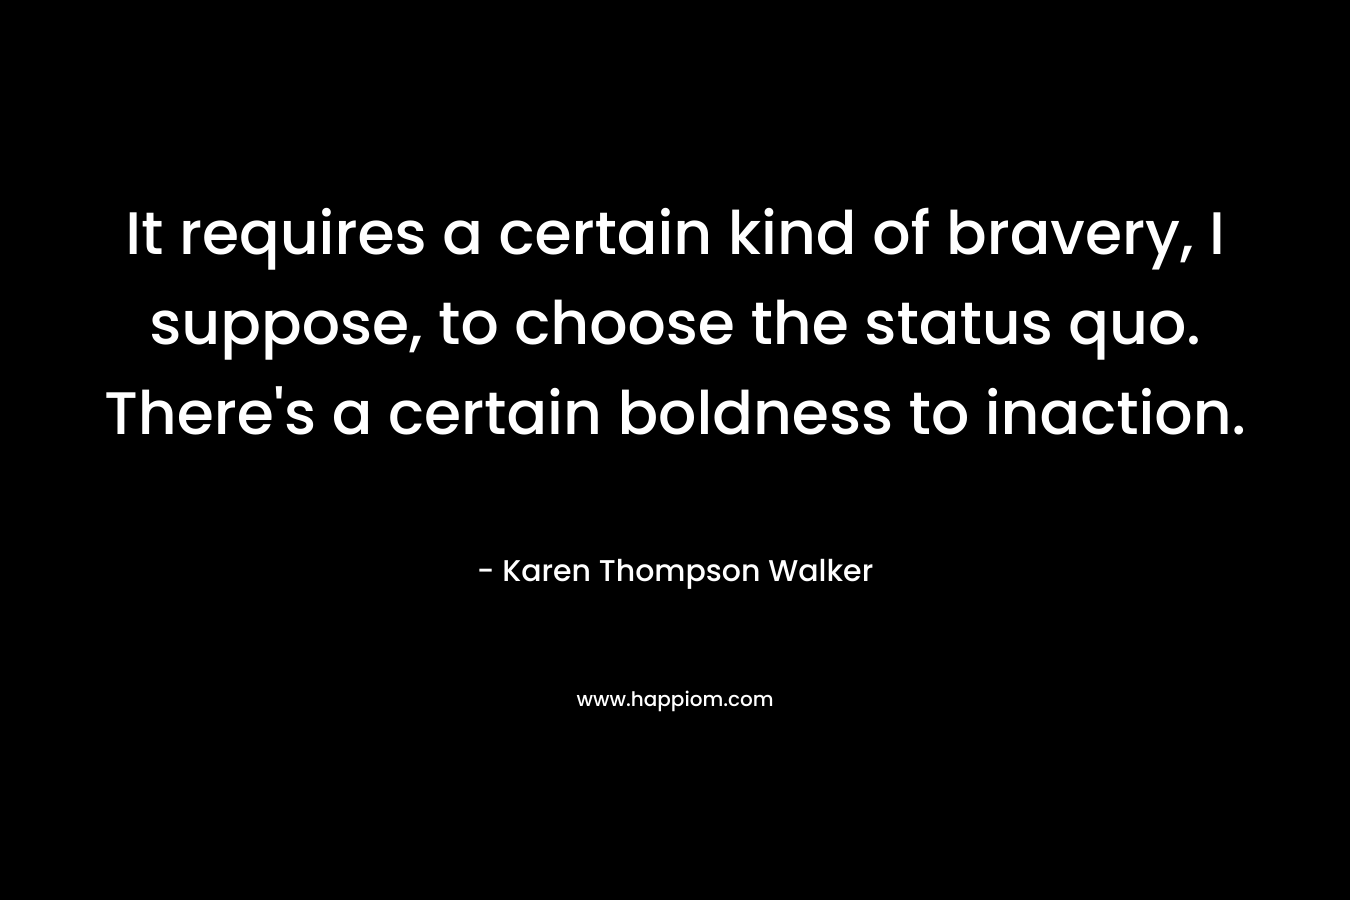 It requires a certain kind of bravery, I suppose, to choose the status quo. There’s a certain boldness to inaction. – Karen Thompson Walker